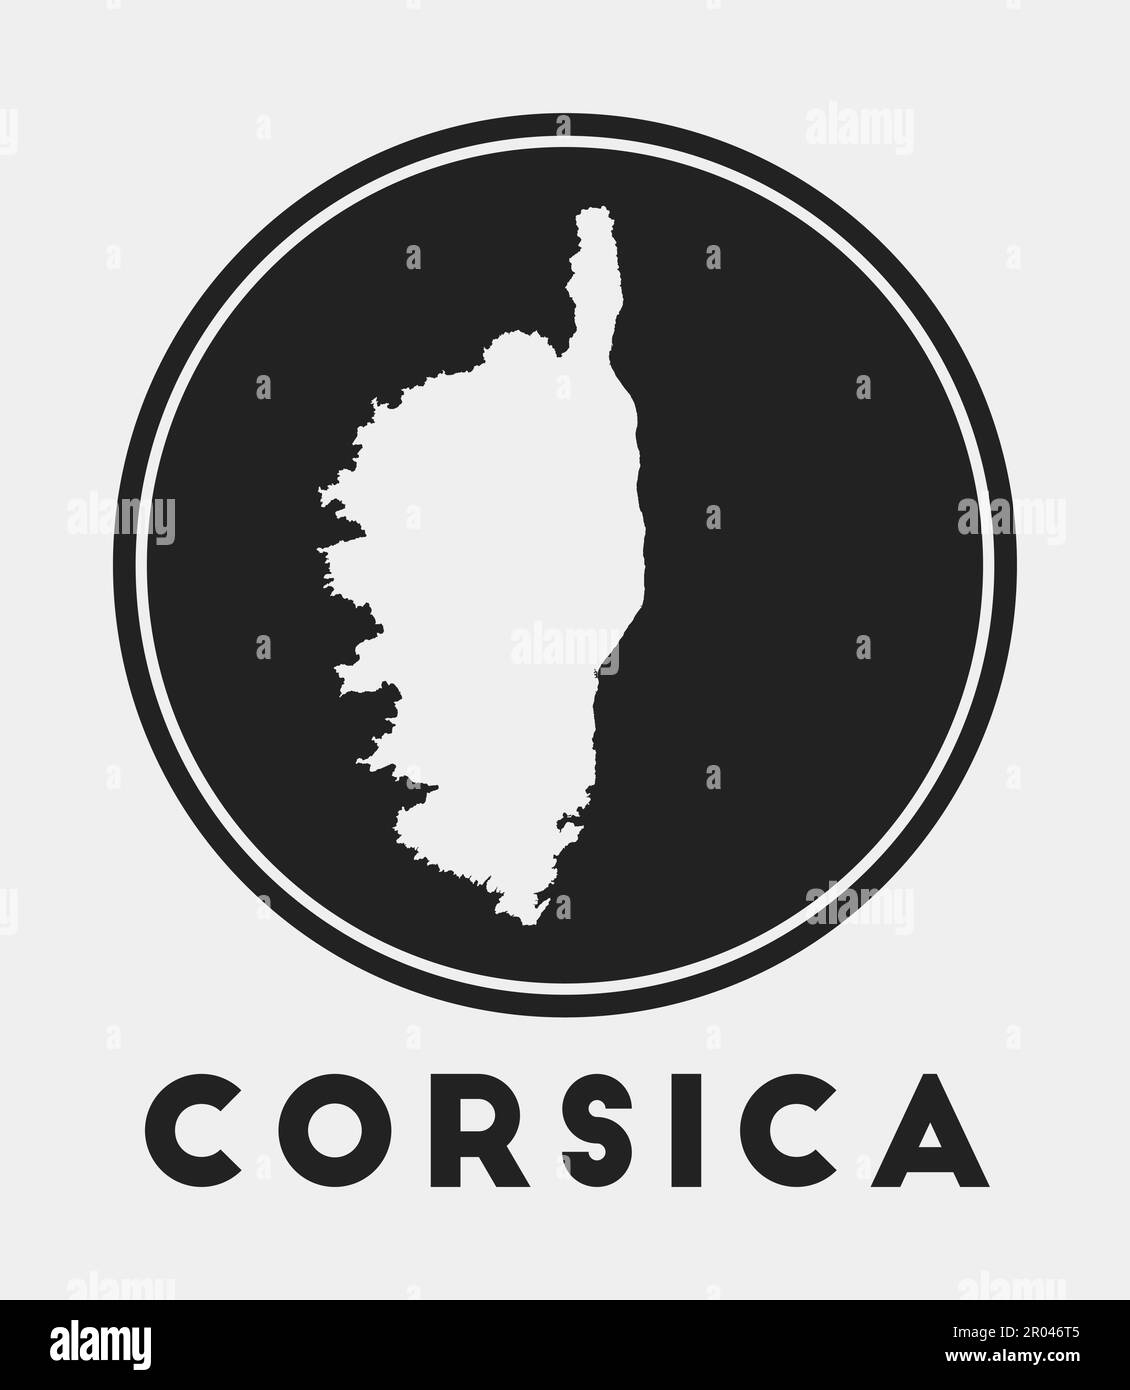 Corsica icon. Round logo with island map and title. Stylish Corsica ...